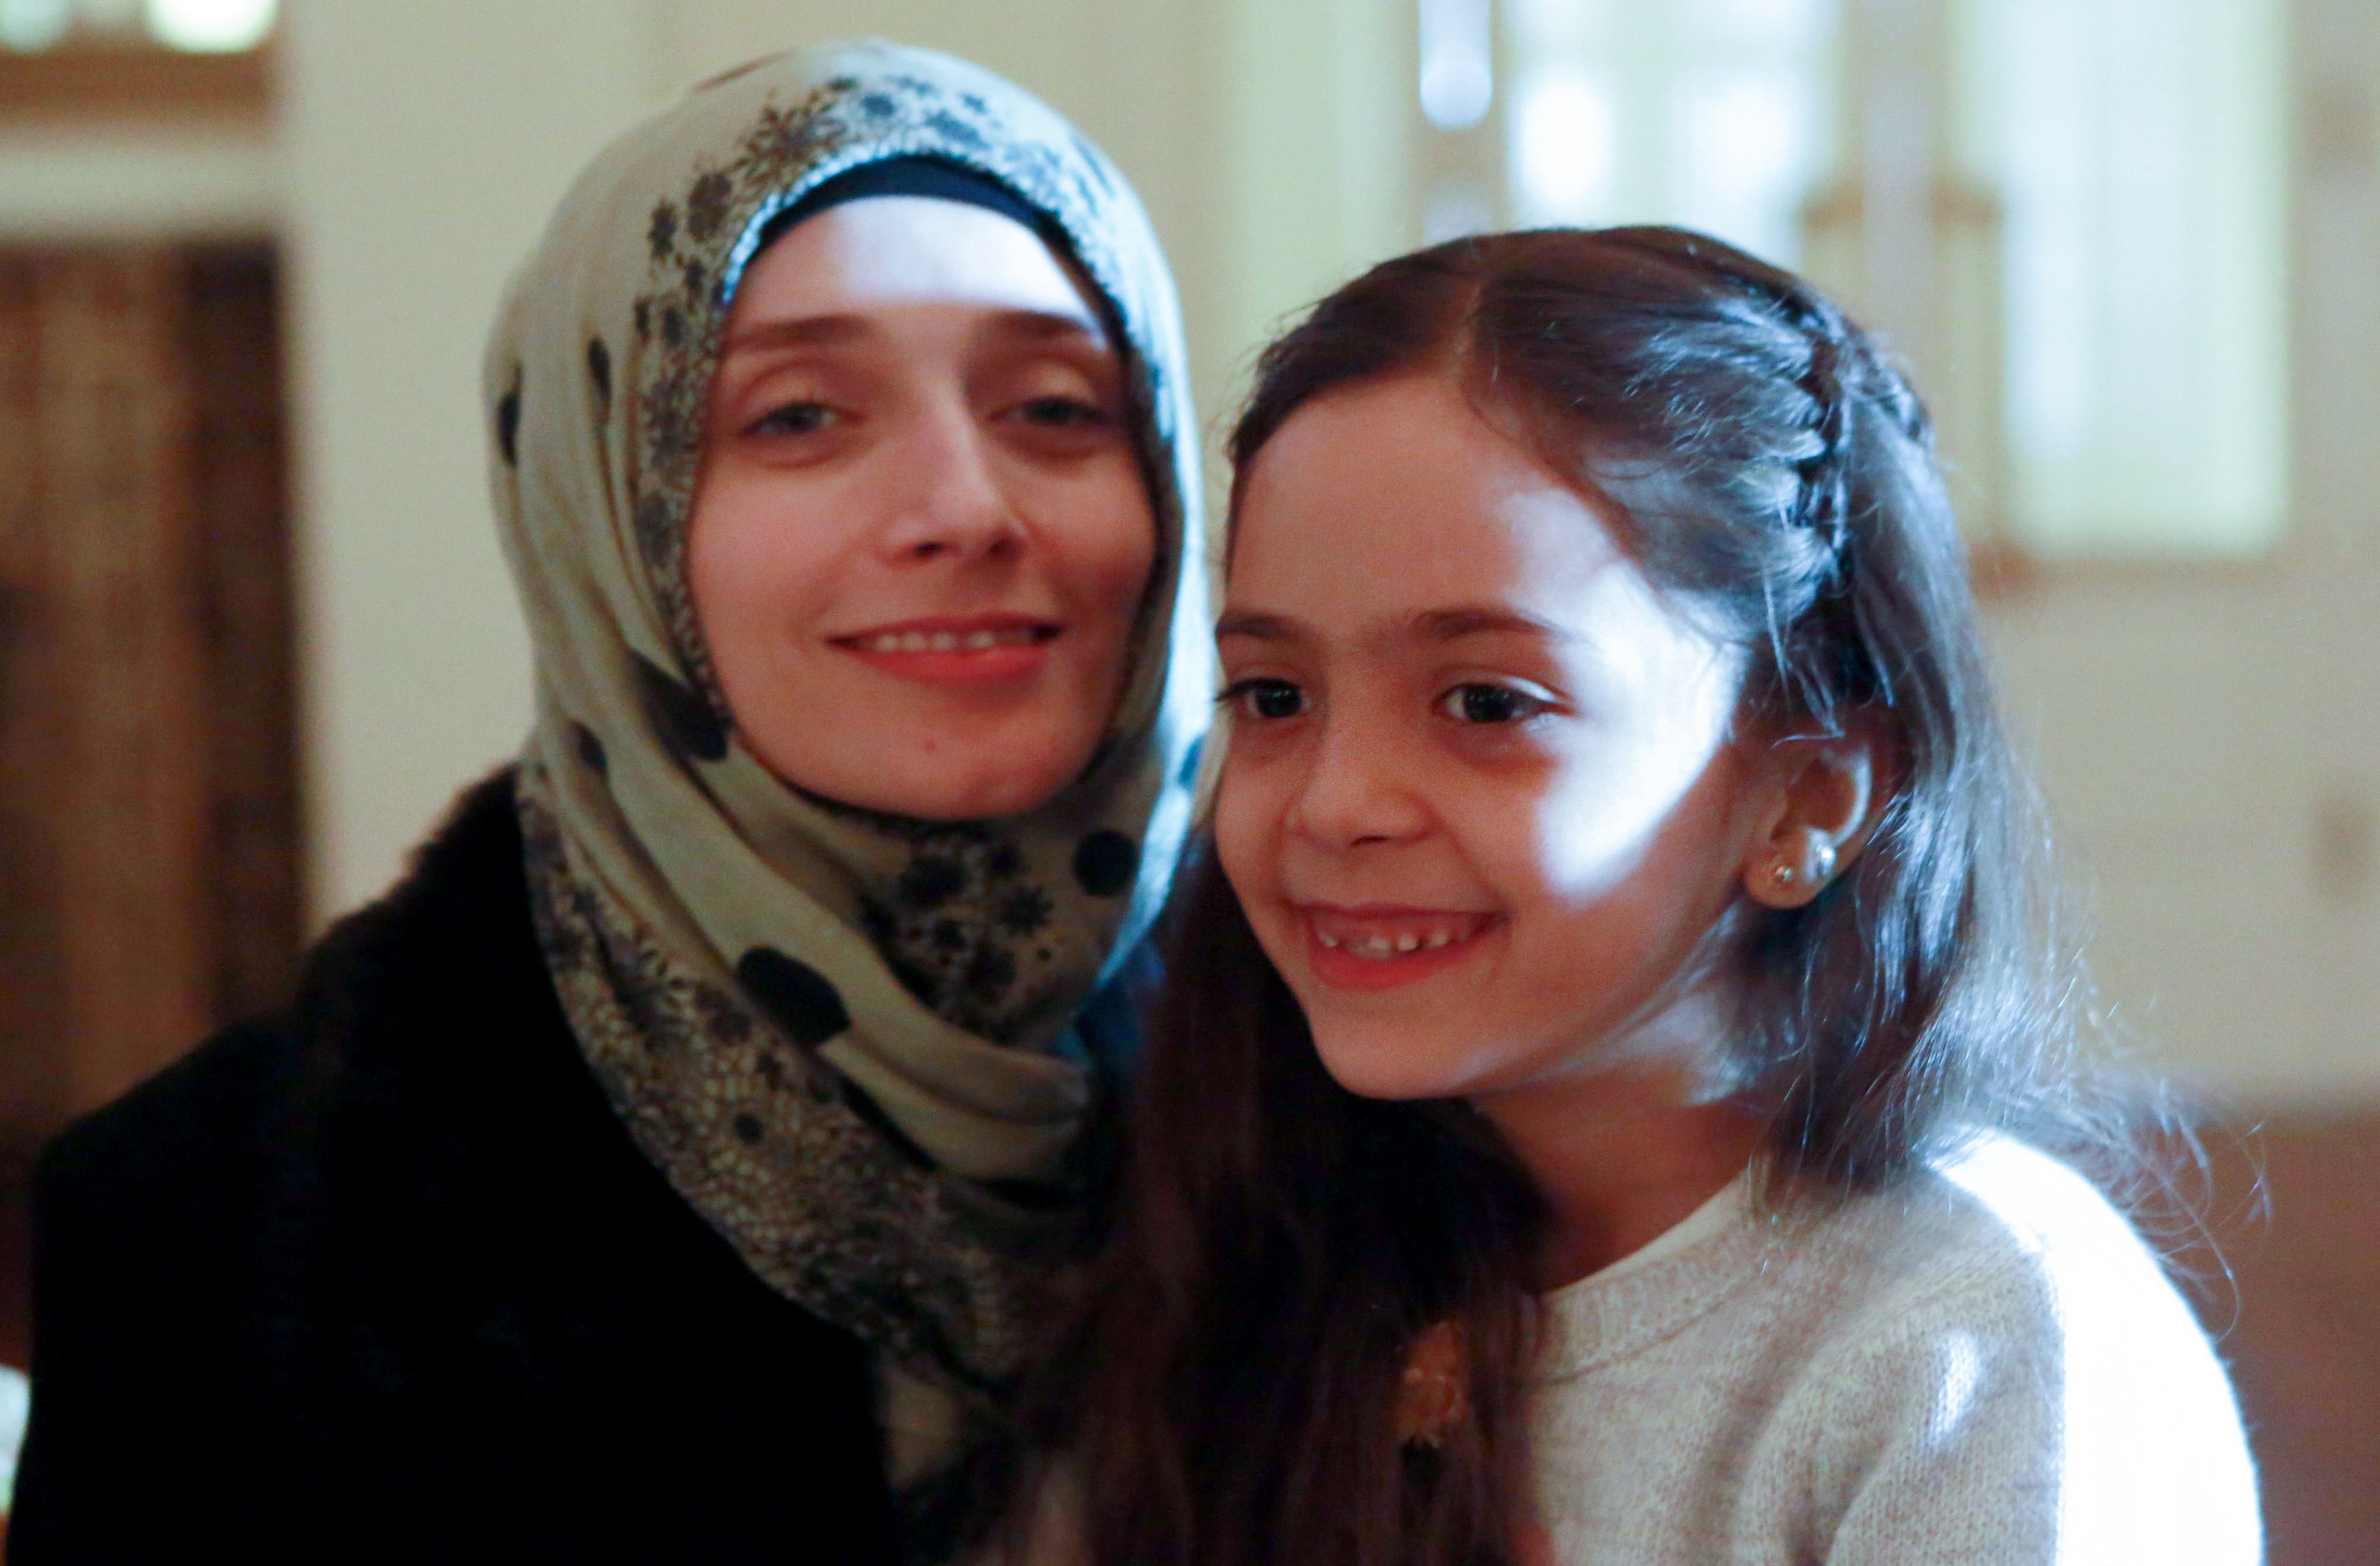 Syrian girl Bana al-Abed (R), known as Aleppo's tweeting girl, poses with her mother Fatemah during an interview in Ankara, Turkey, on December 22, 2016. (Adem Altan—AFP—Getty Images)